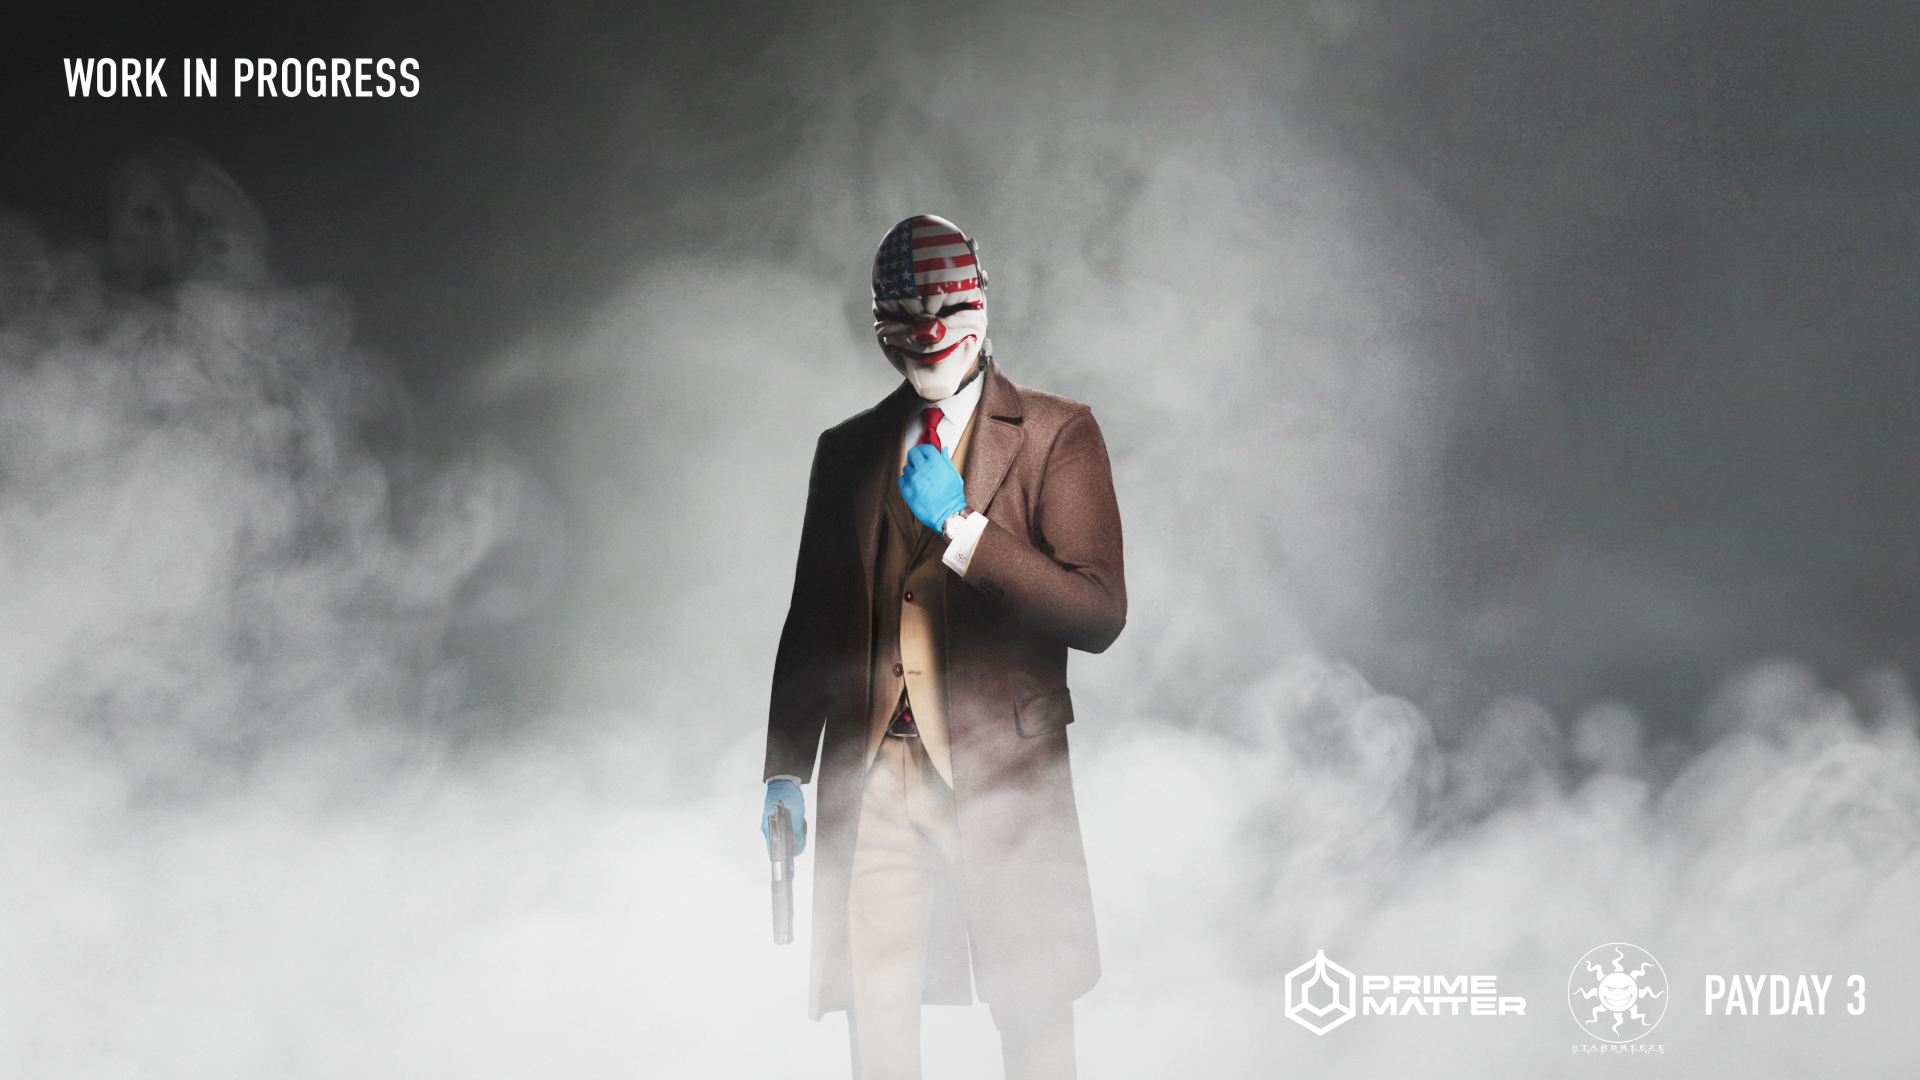 A concept image of characters from the upcoming game Payday 3